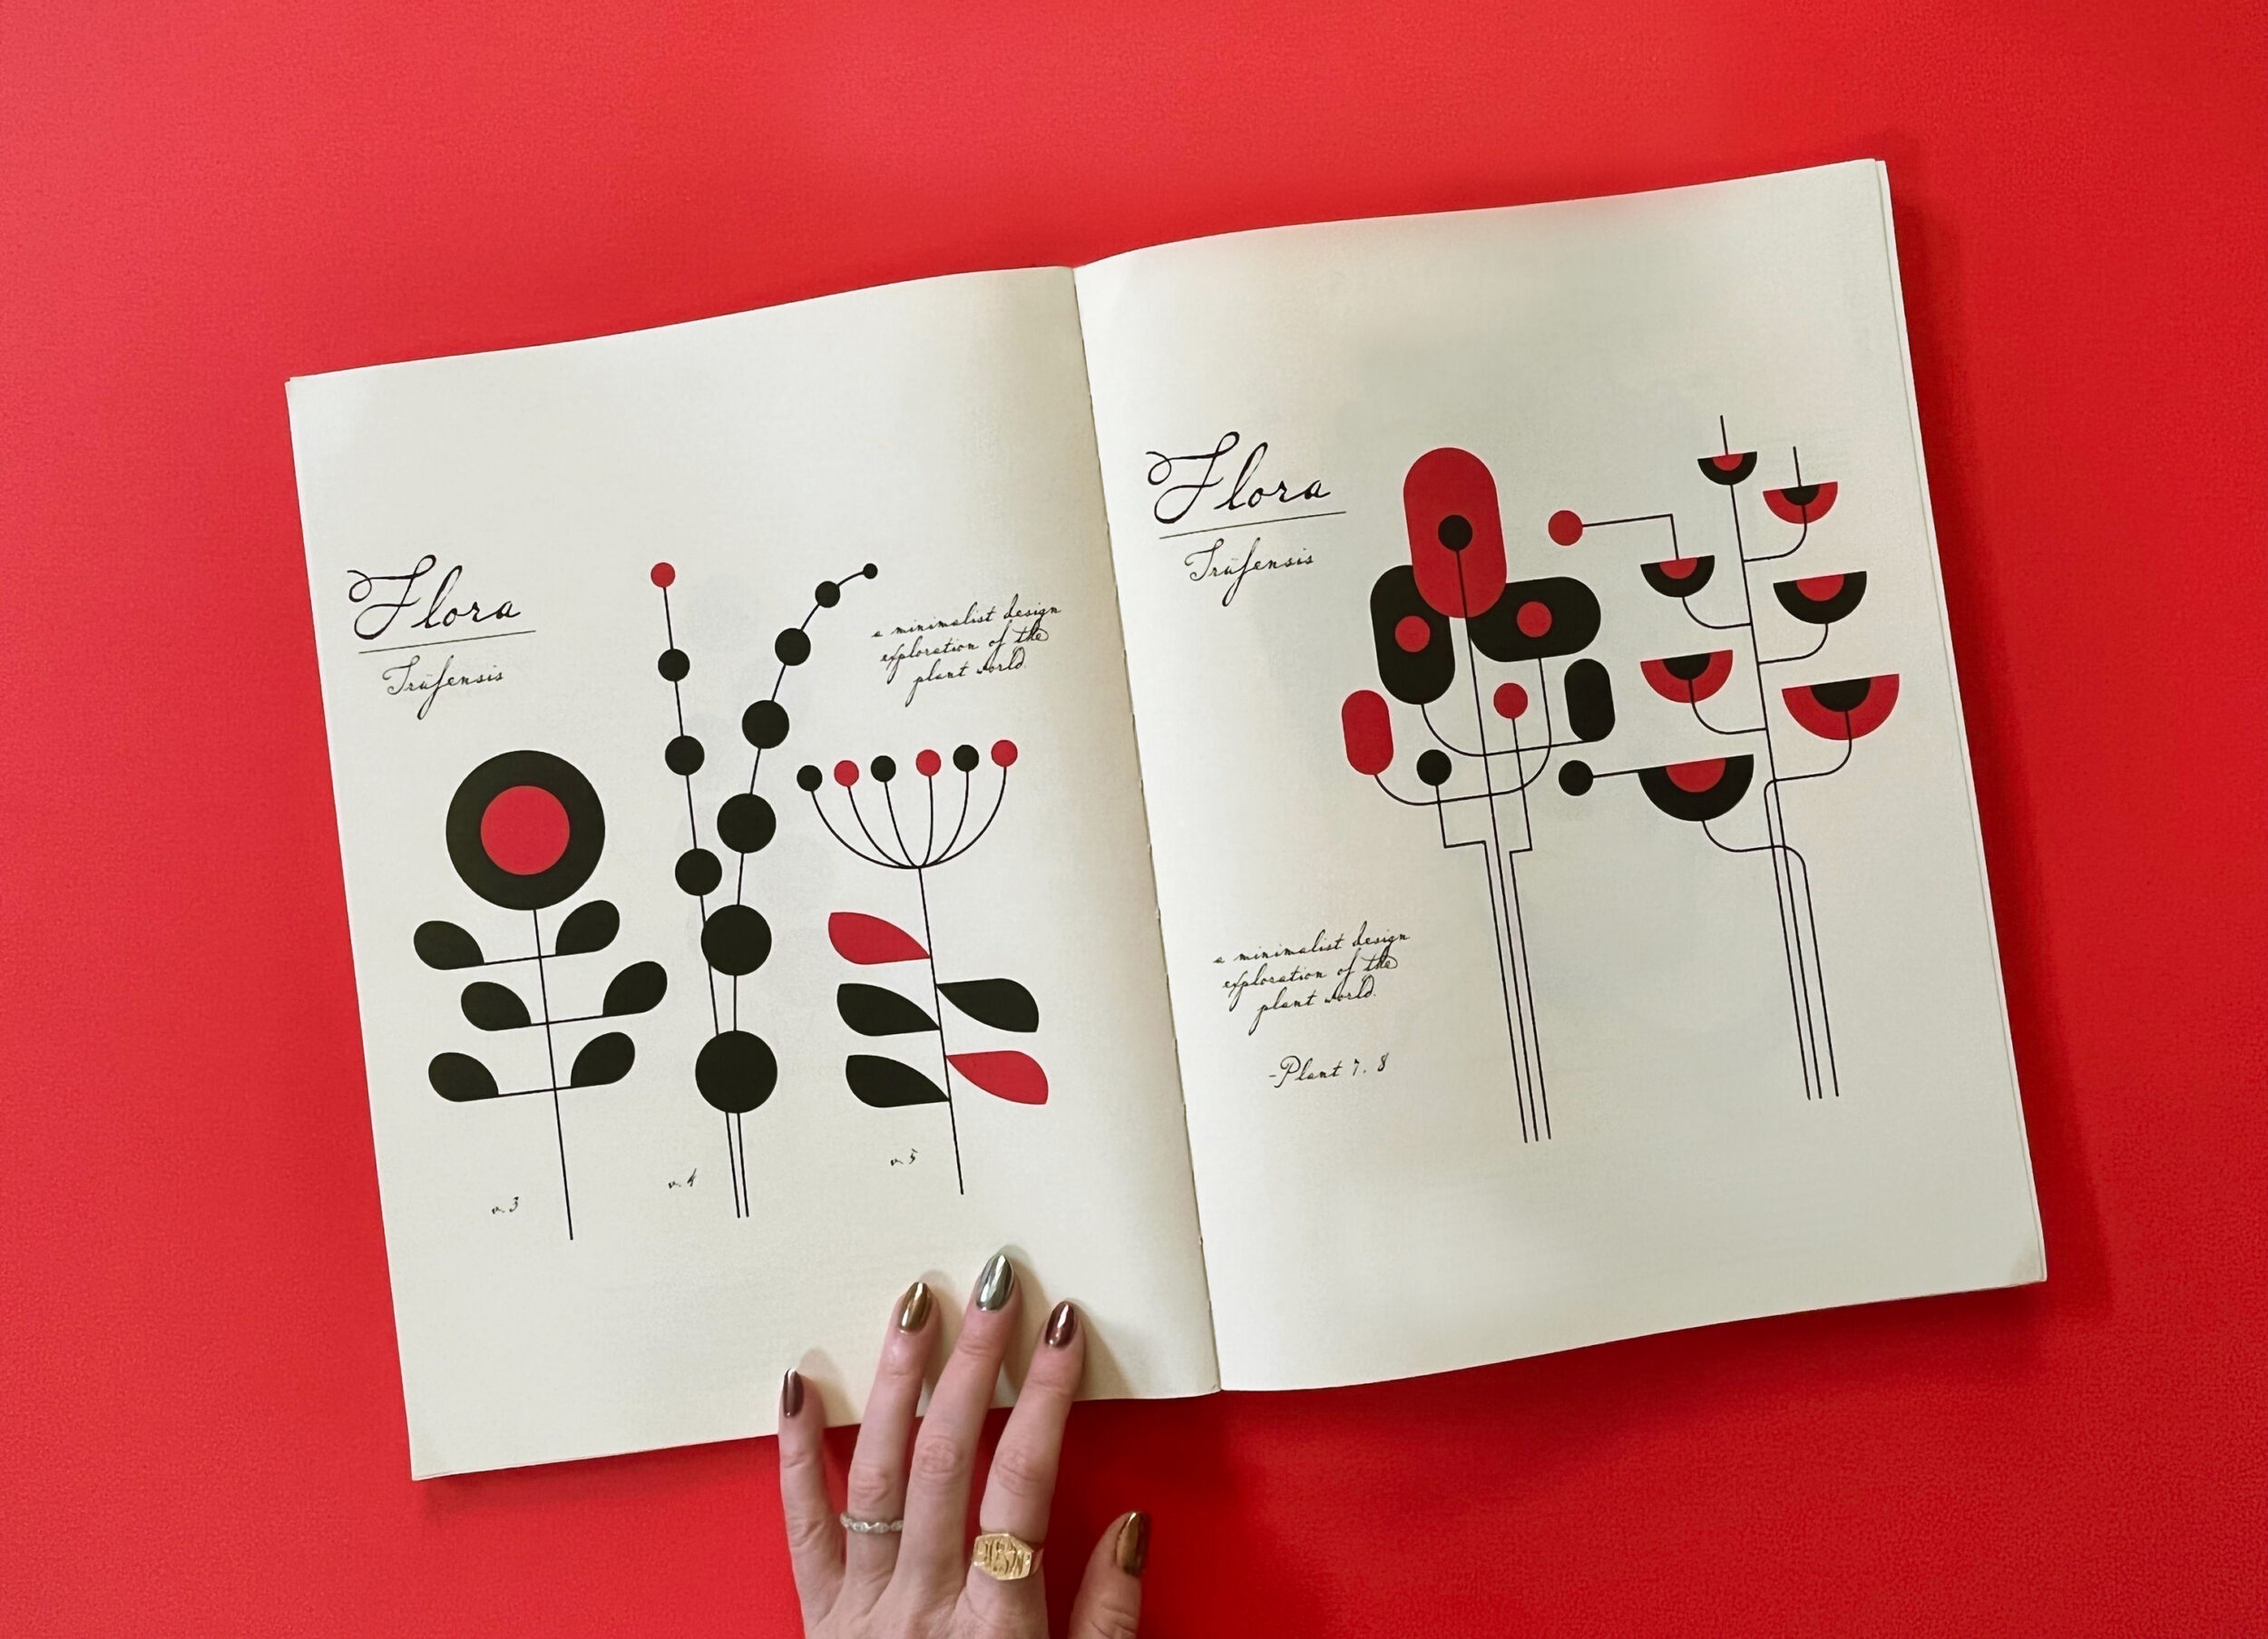 hand holding open spread of 24 ore cultura herbaria magazine with black and red flora illustrations